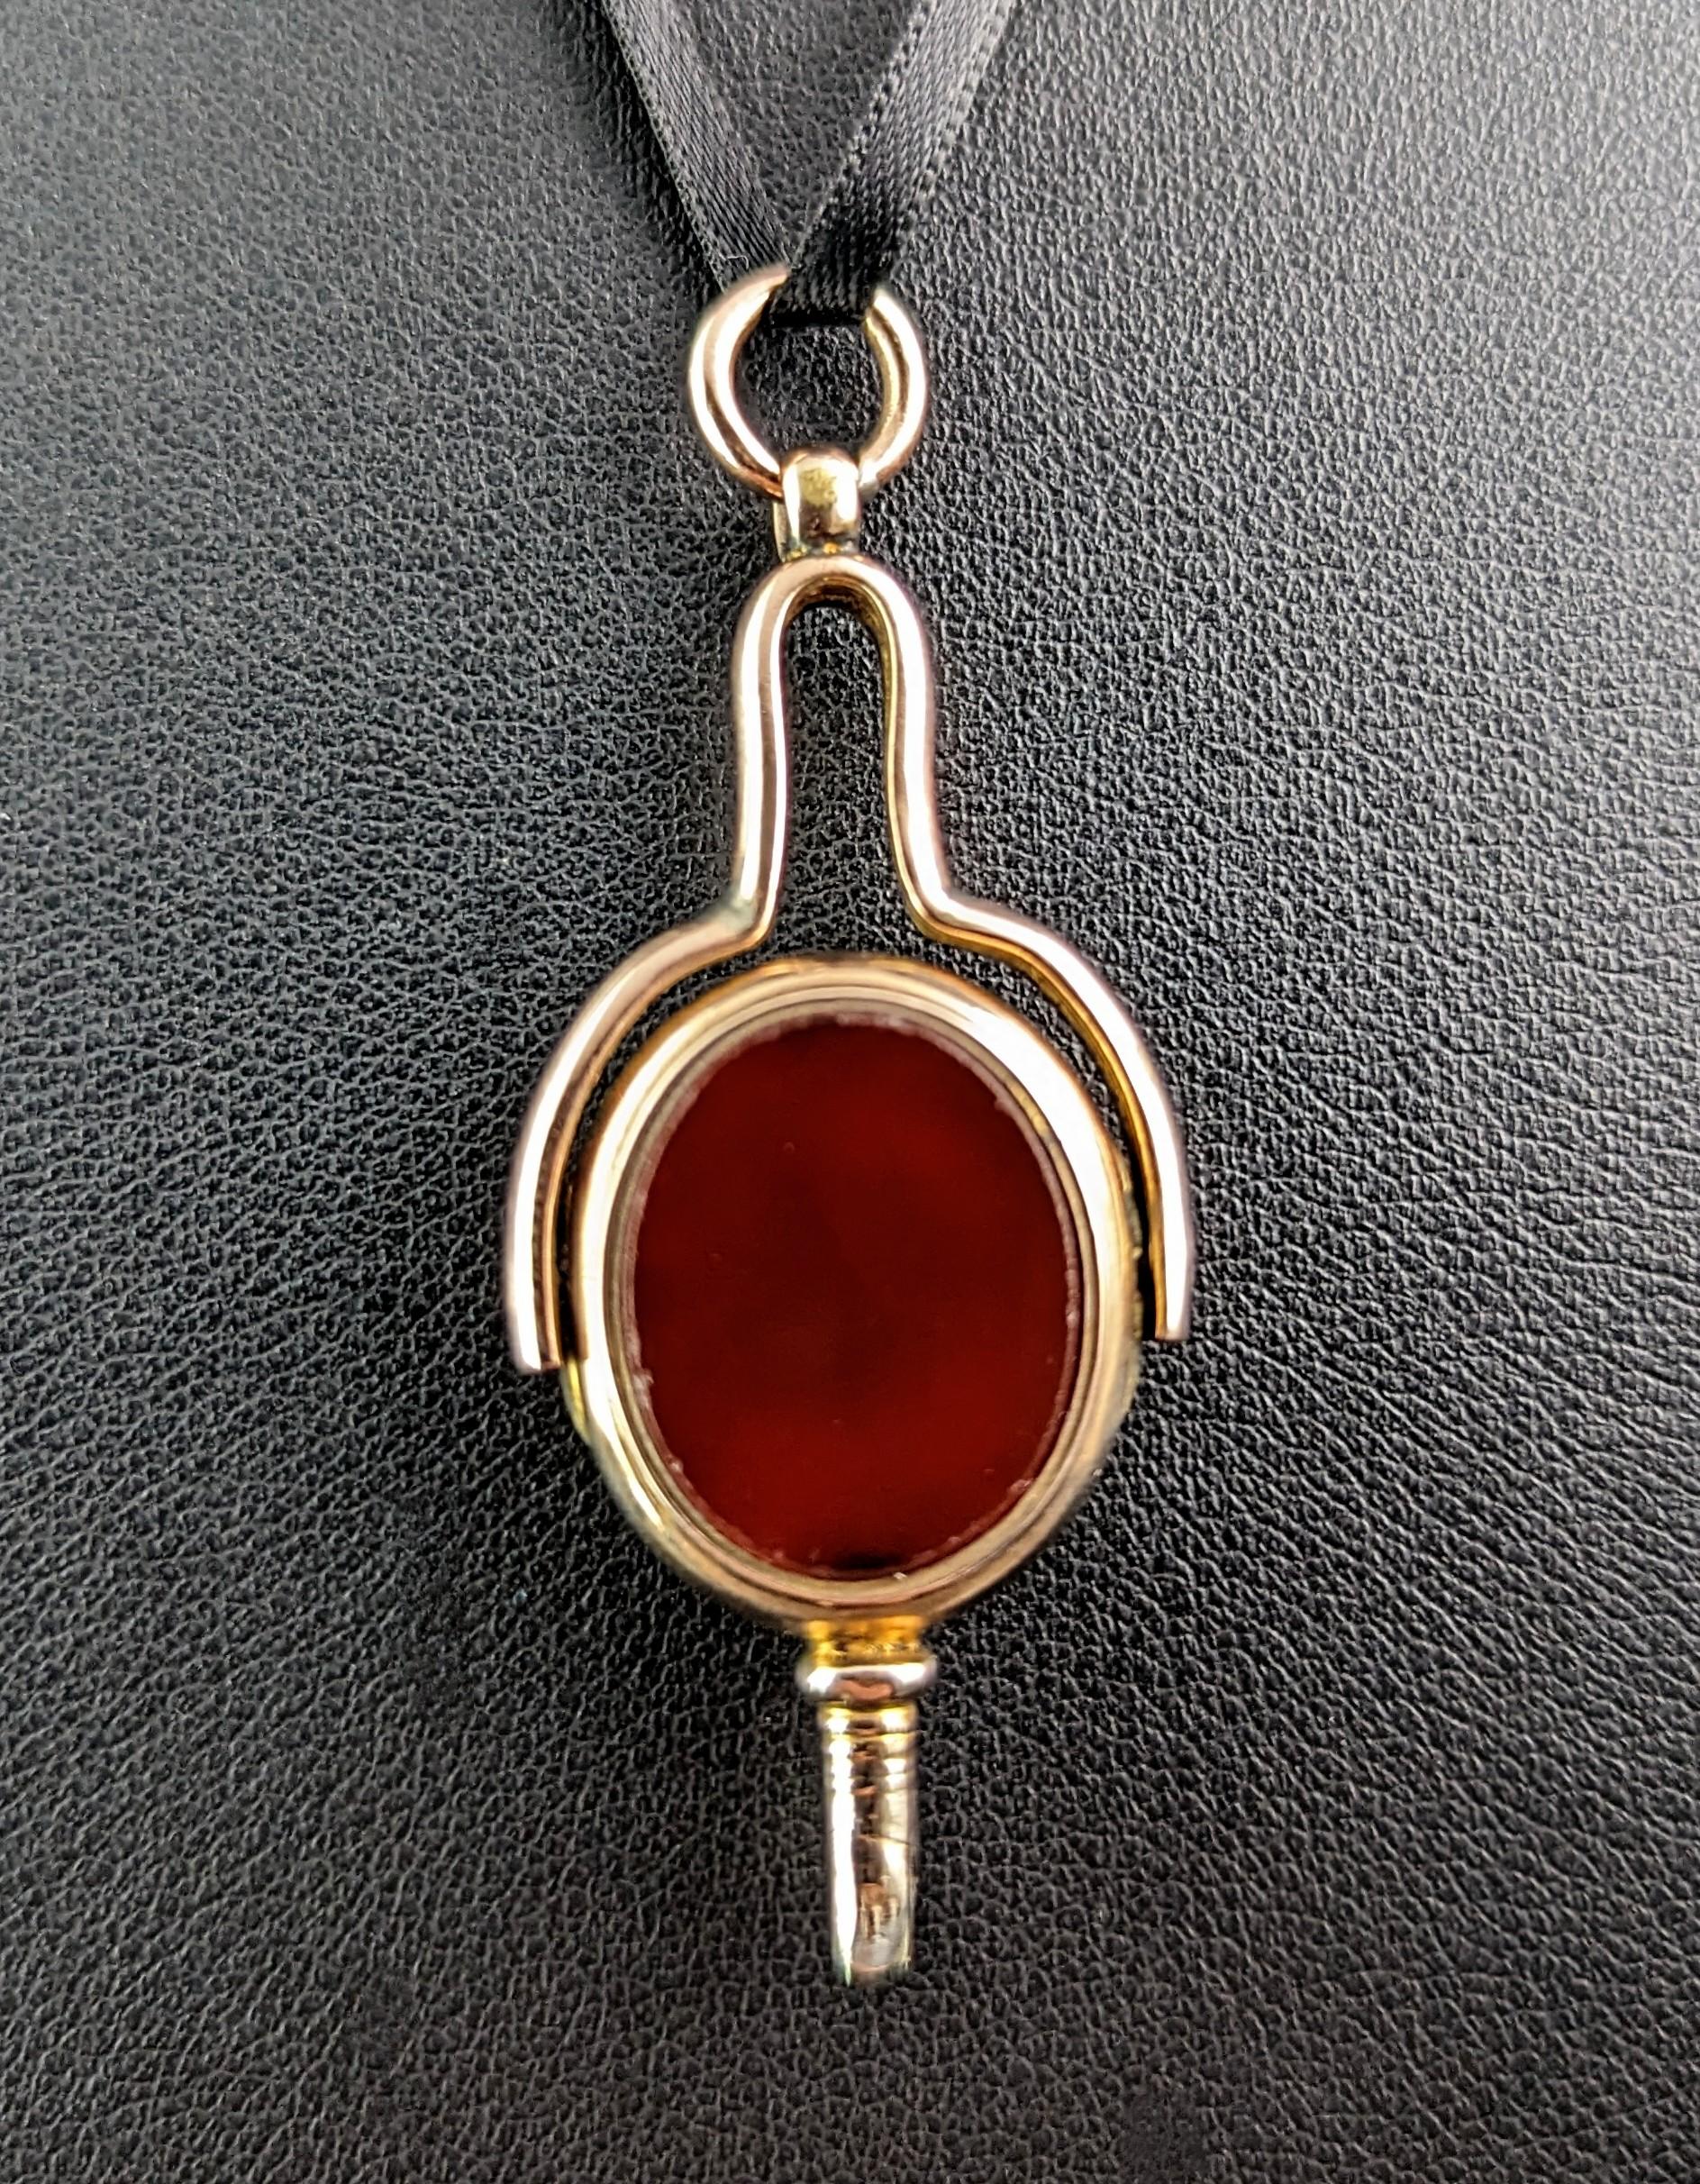 This antique Victorian 9ct gold watch key seal fob makes for a fantastic pendant or the perfect addition to your favourite Albert chain.

The Victorians had a great way of turning functional objects into things of beauty and this watch key fob is a